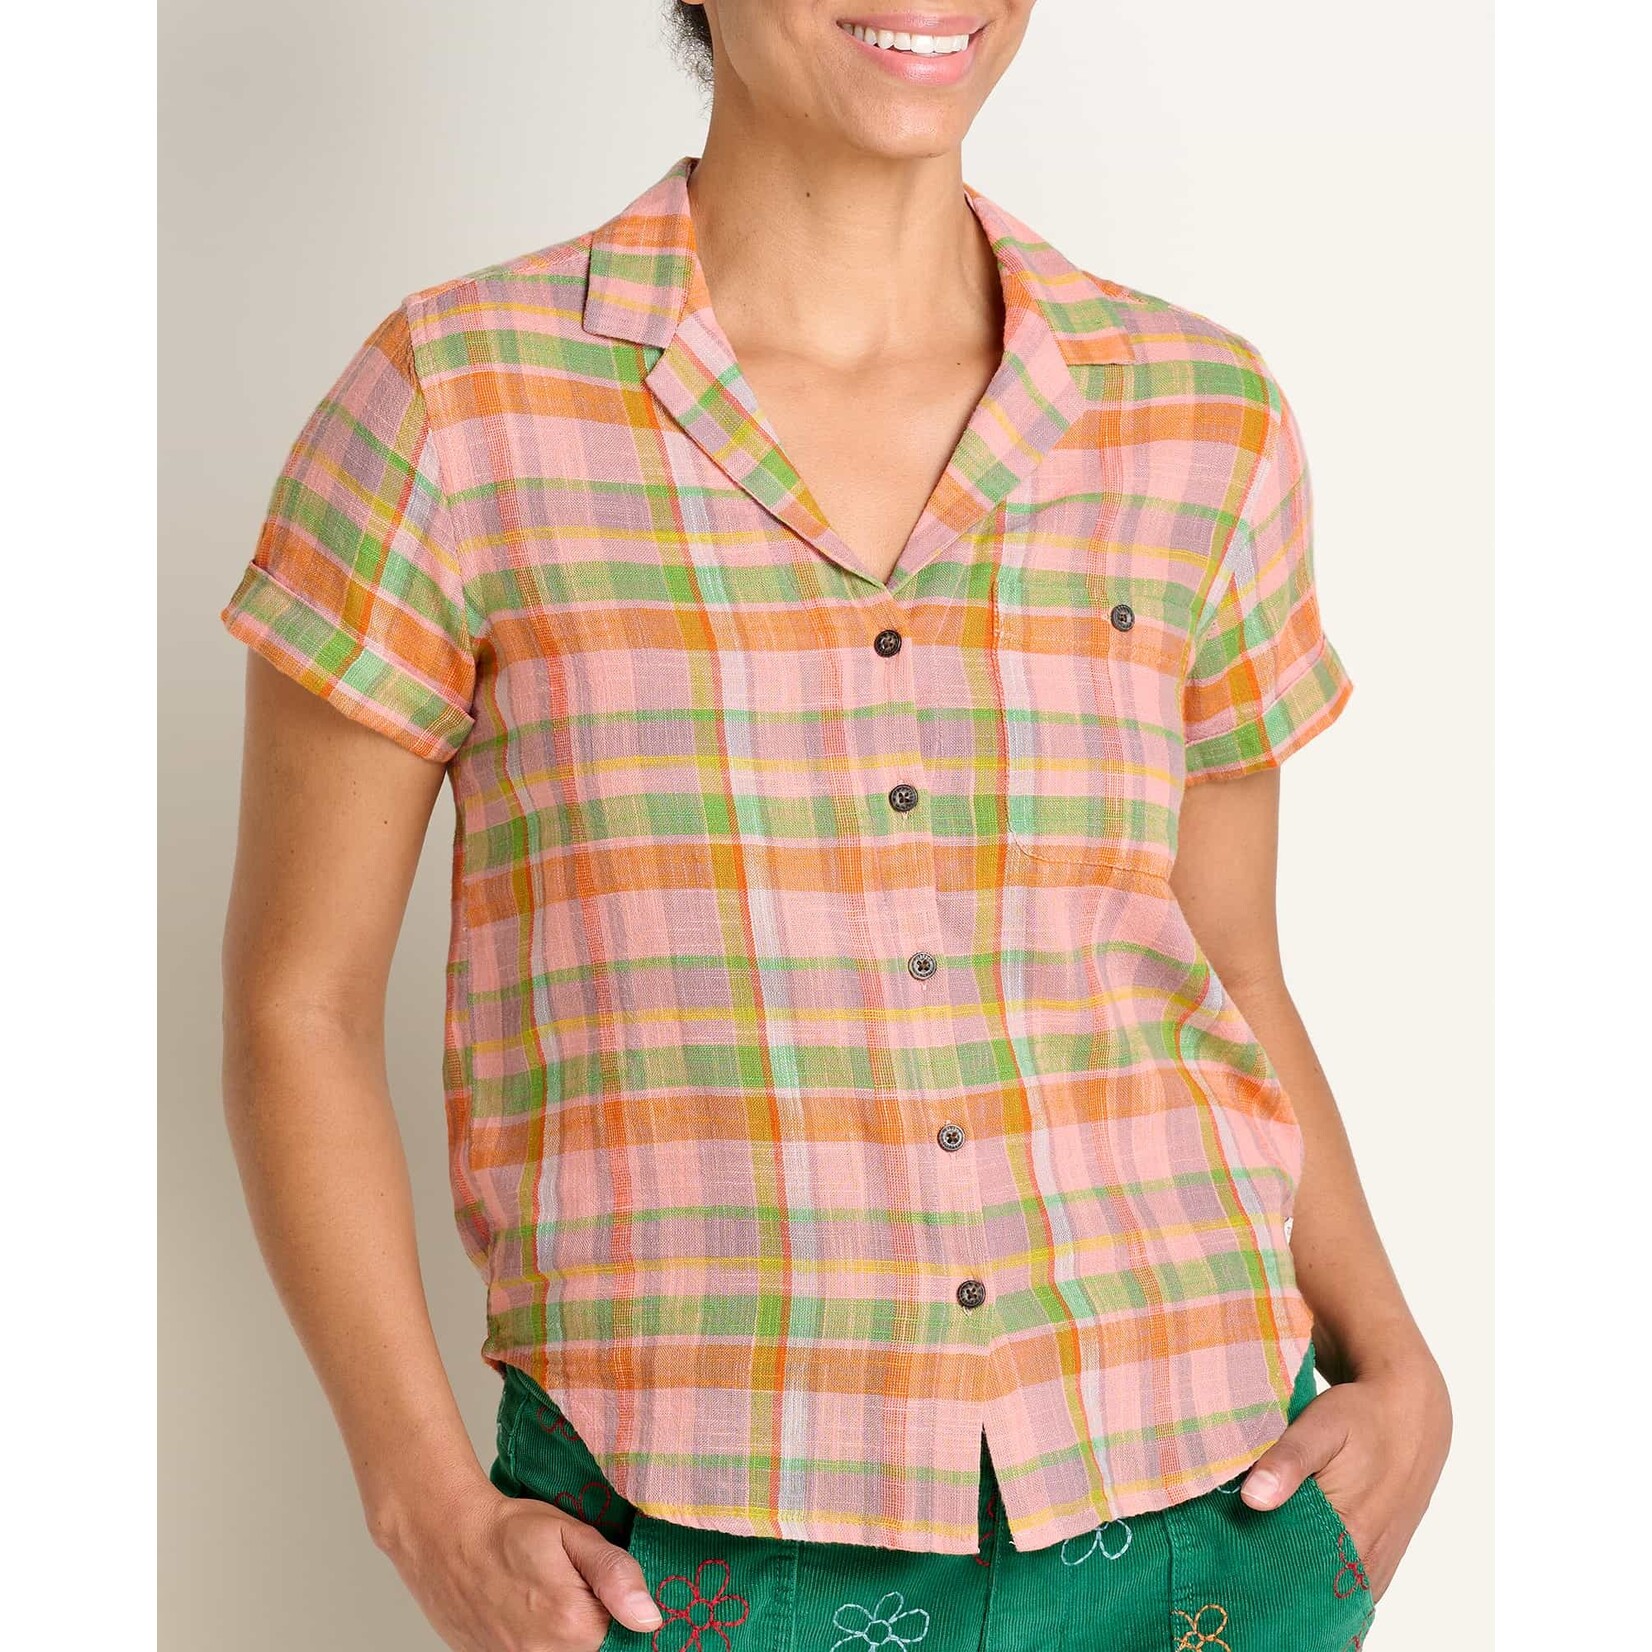 Toad & Co Women's Camp Cove Short Sleeve Shirt